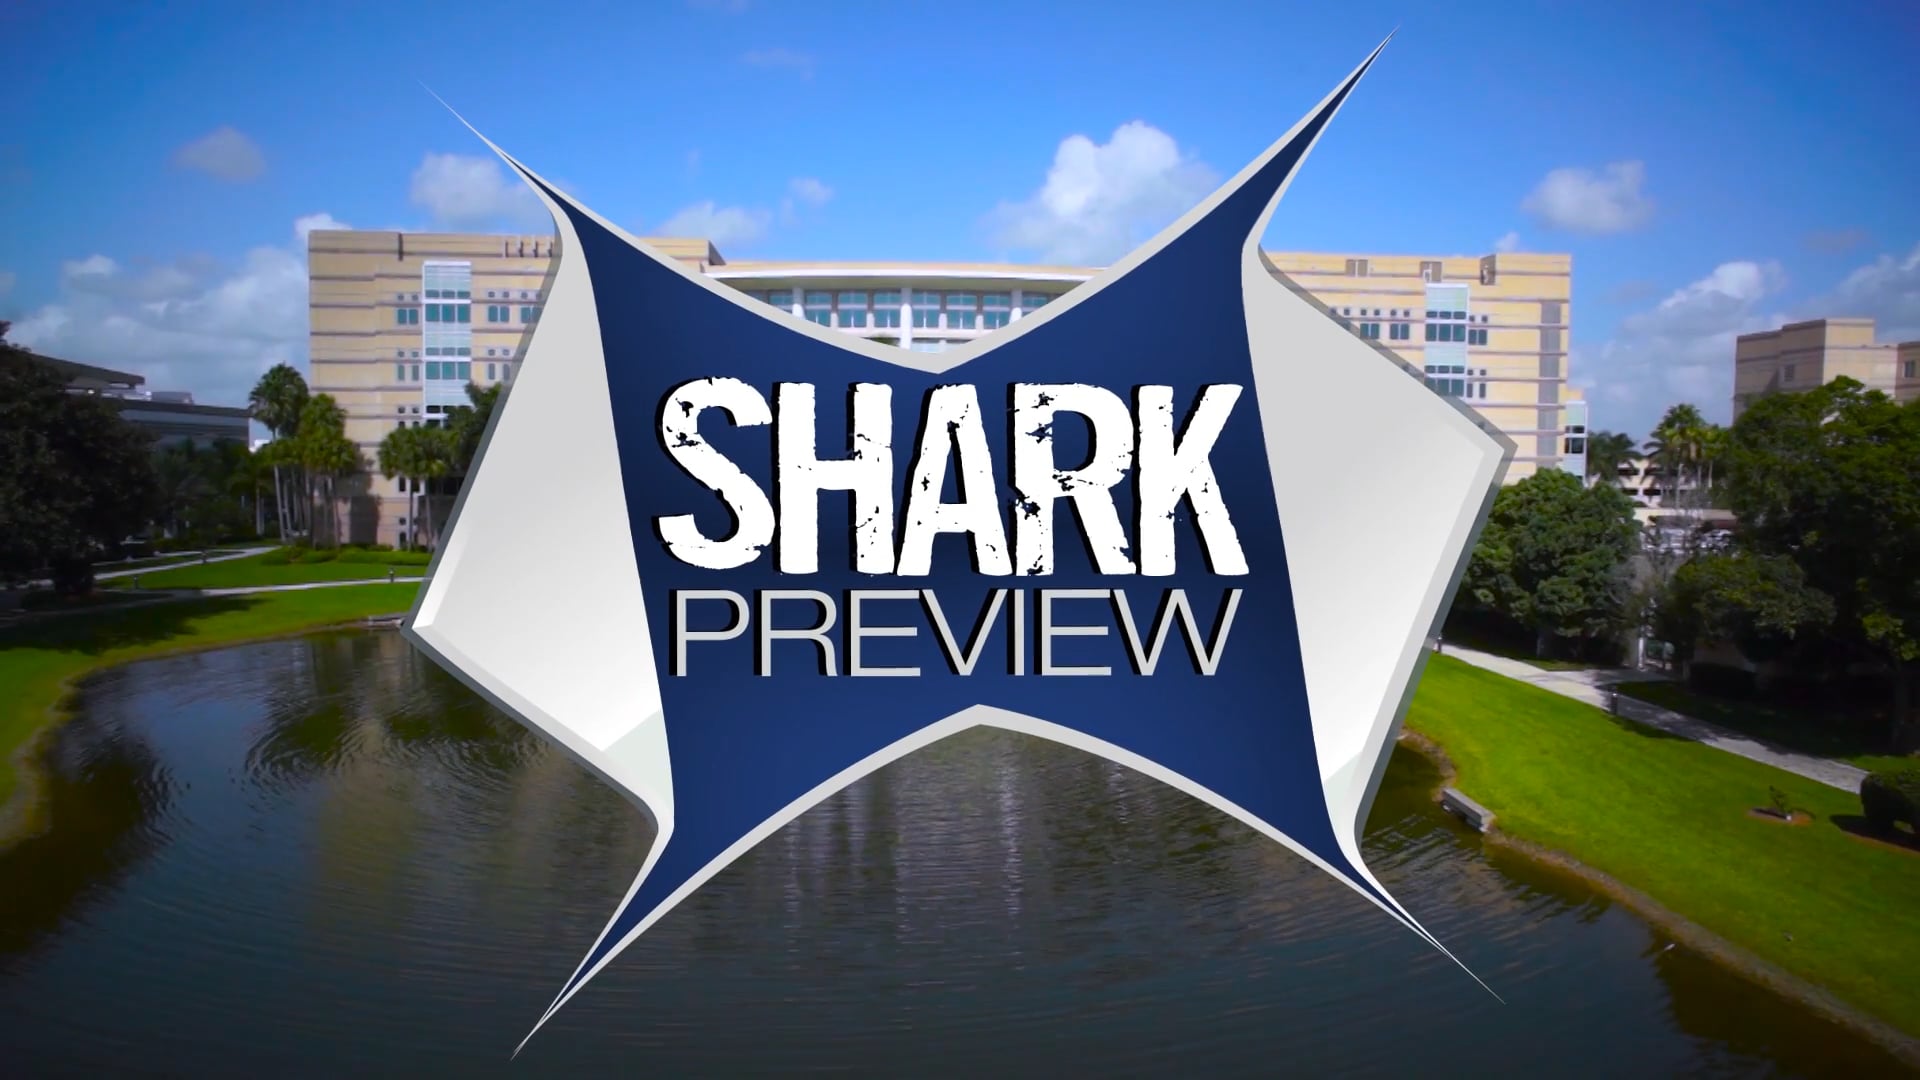 SharkPreview